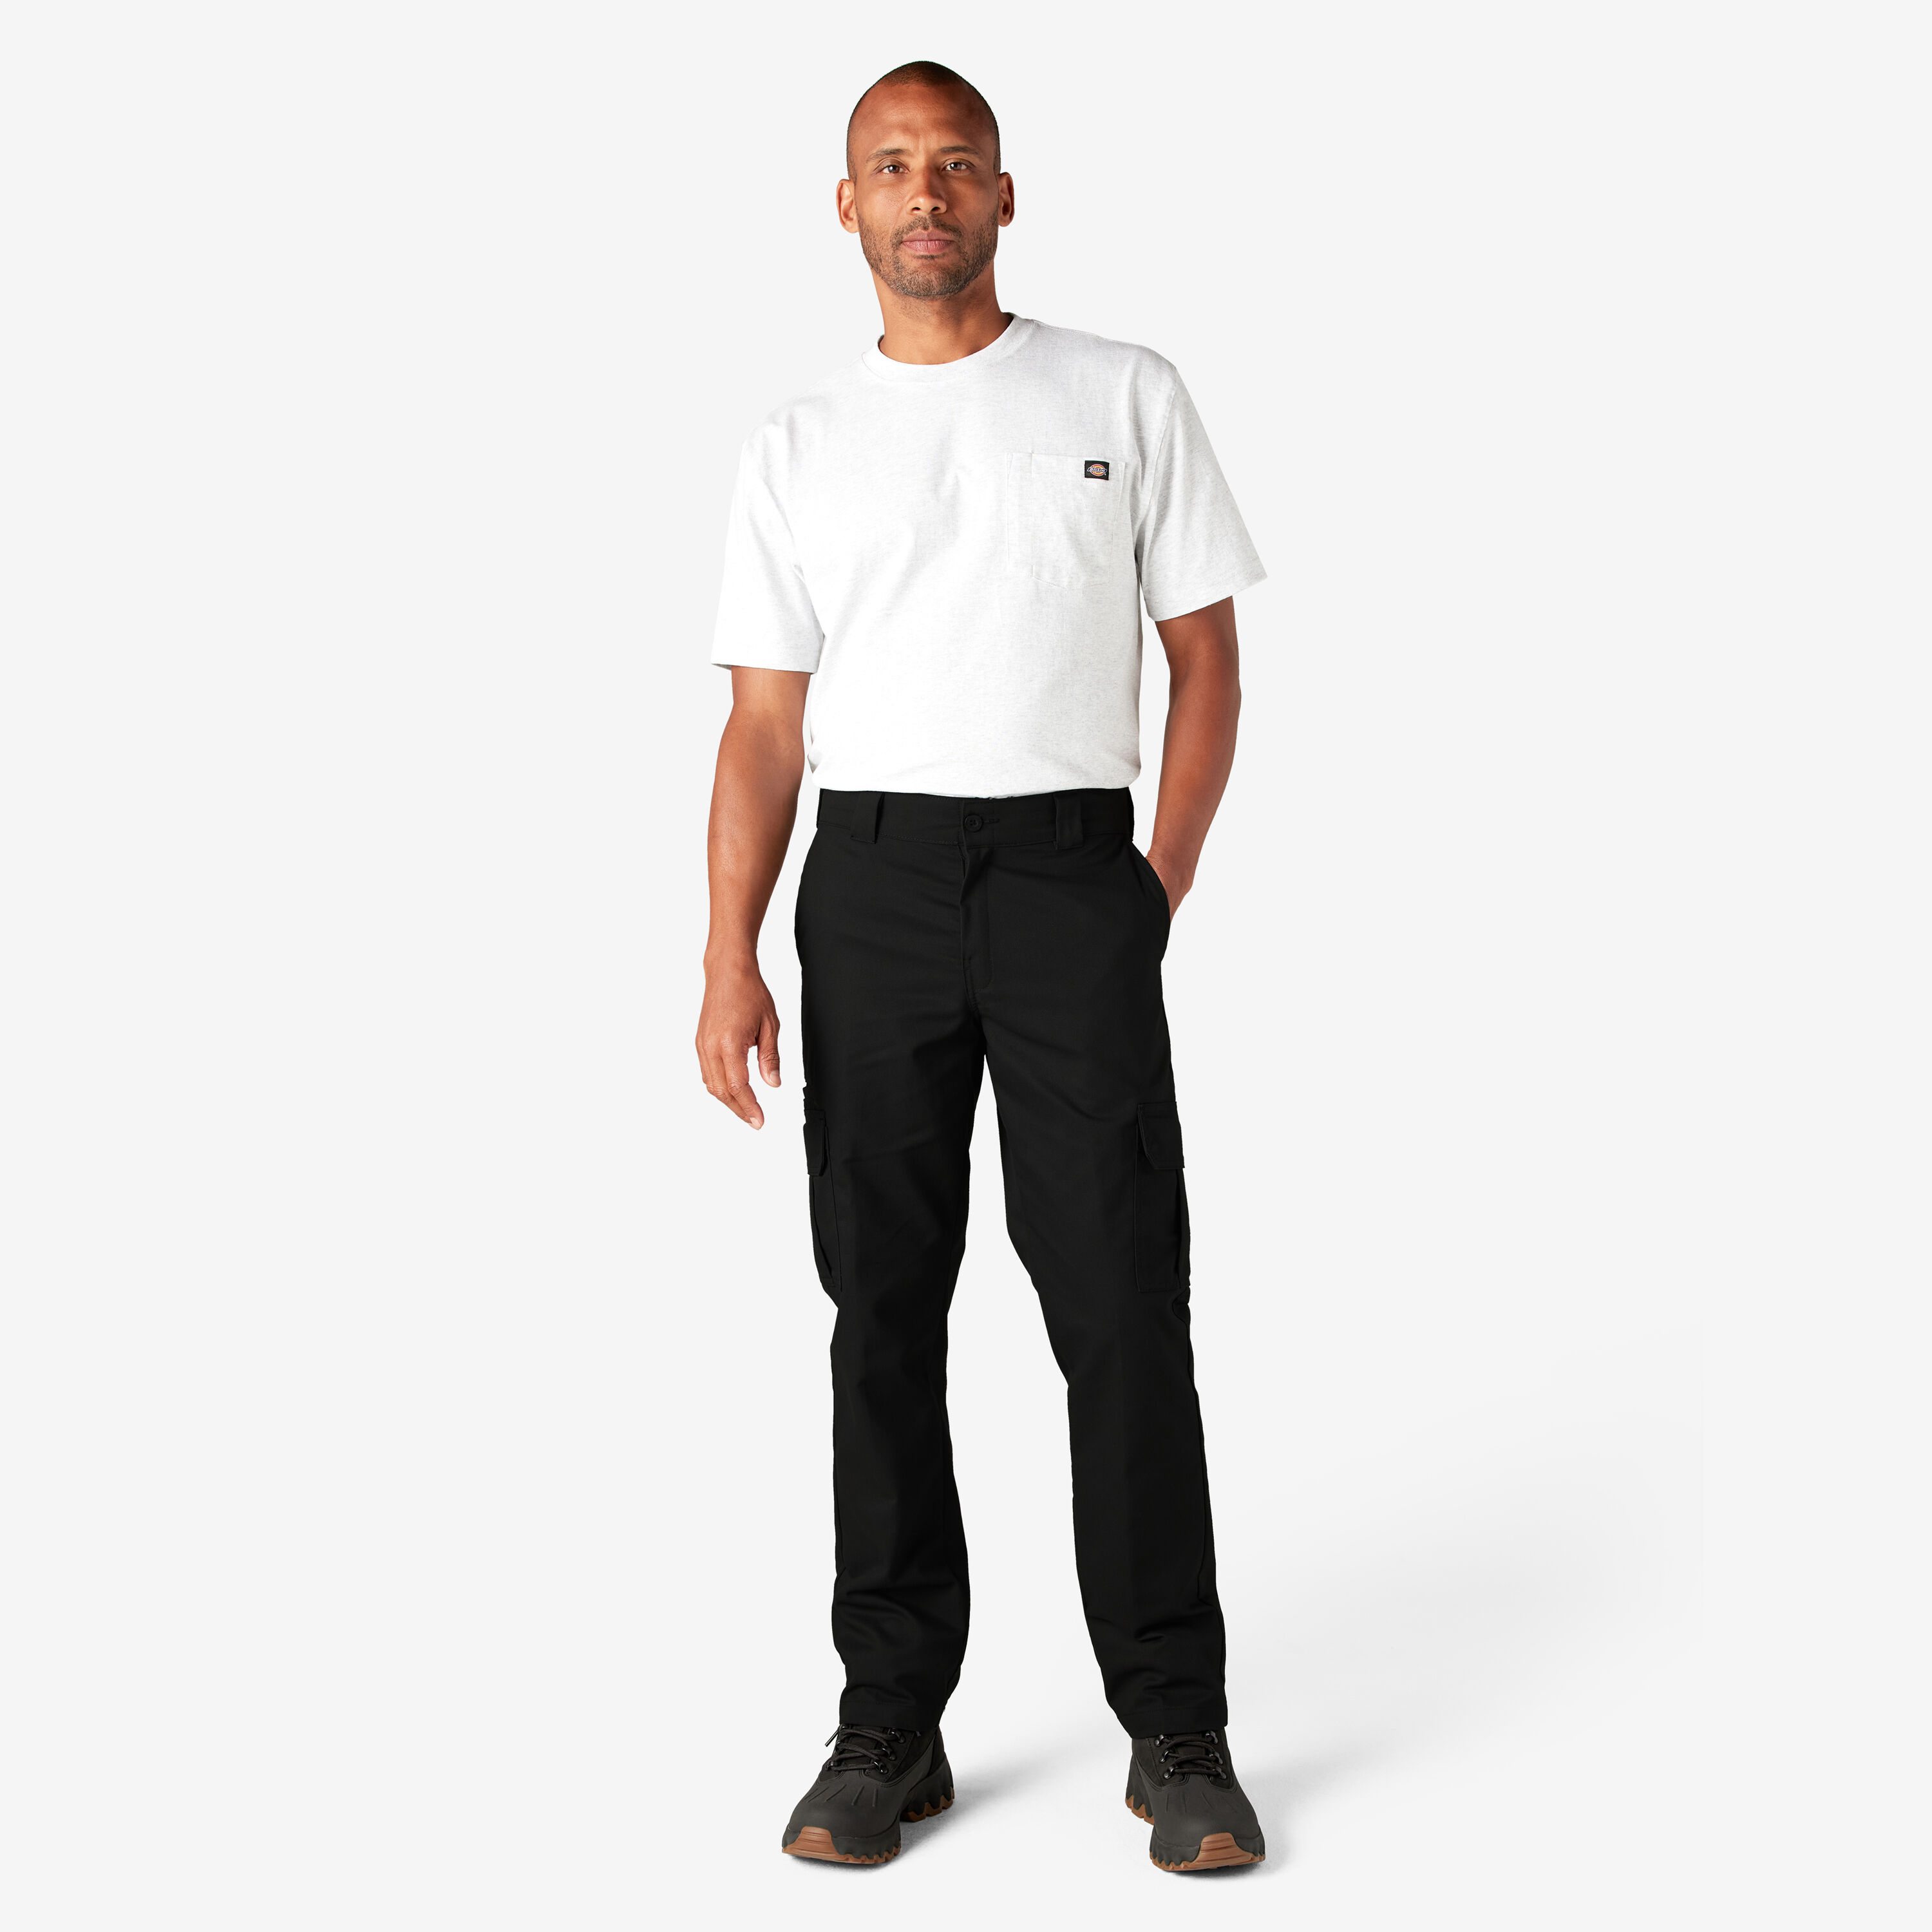 Dickies Men's Relaxed Straight Flex Cargo Pant 